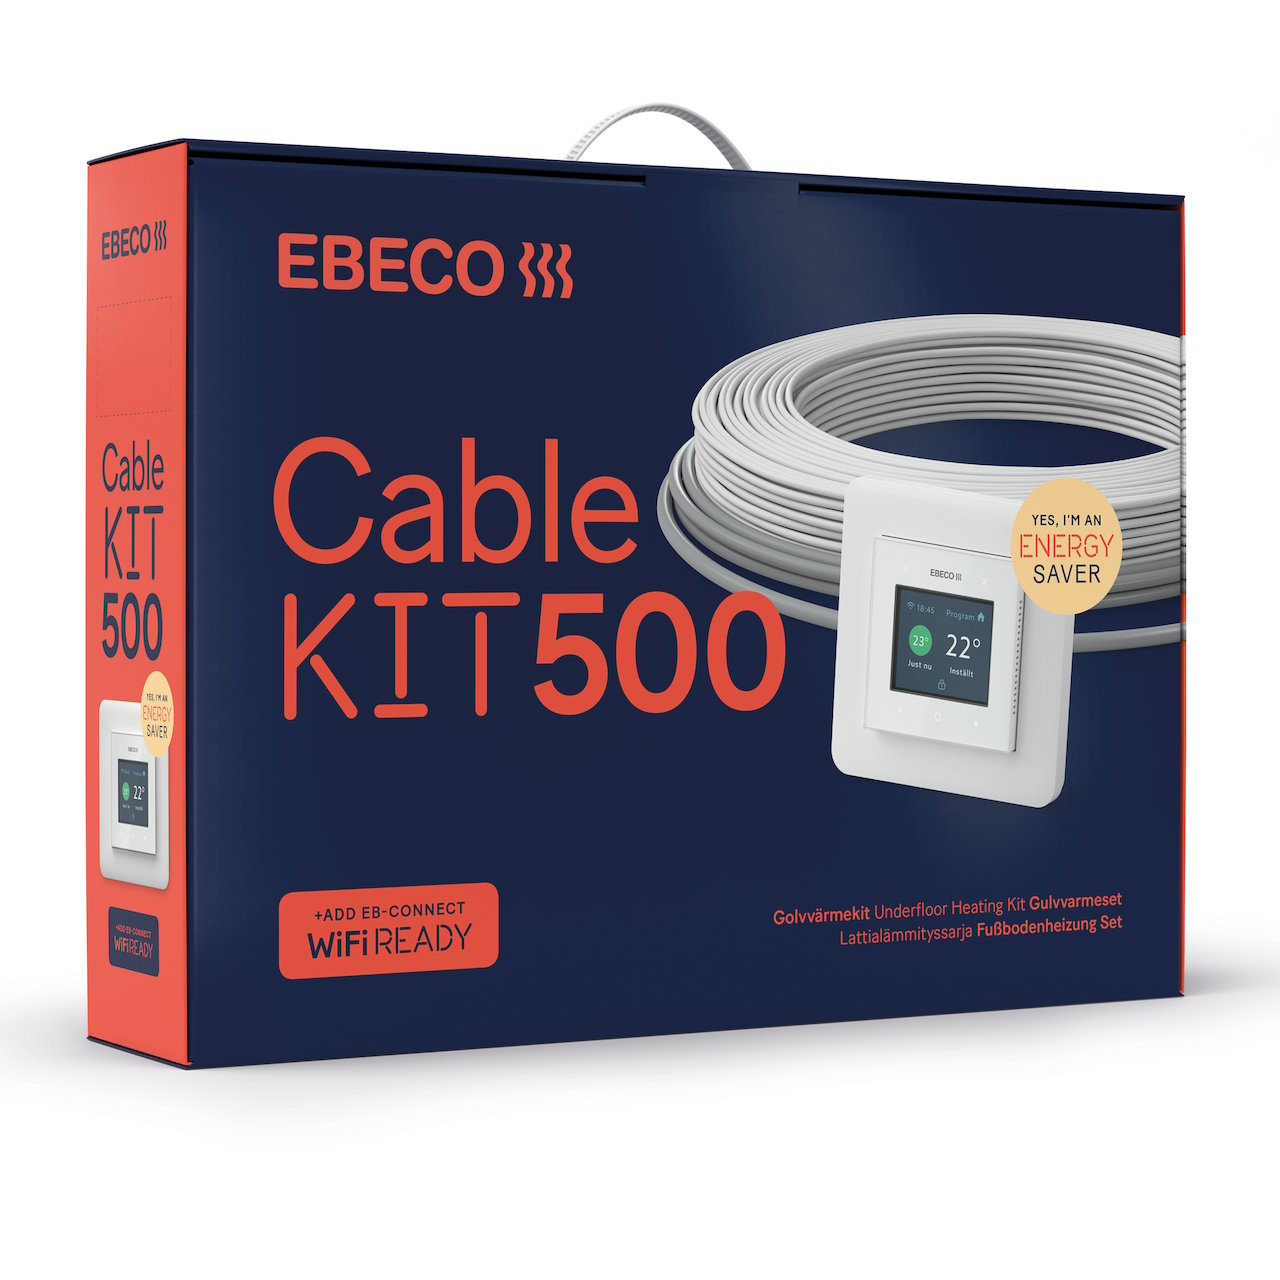 EBECO CABLE KIT 500 124M 1380W